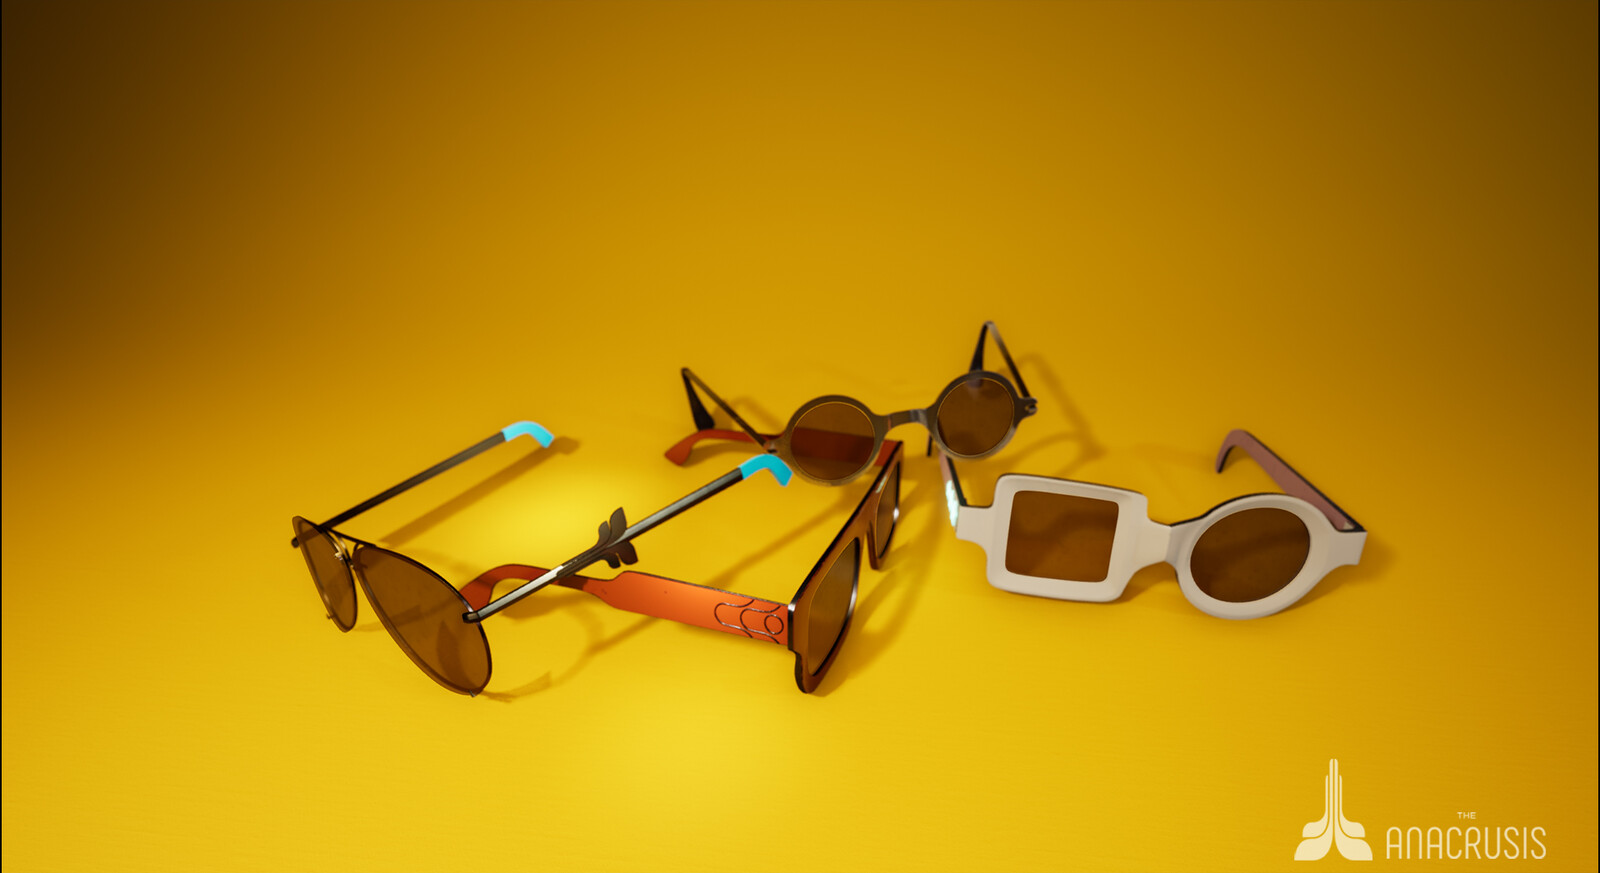 Cosmetics - Sunglasses that represent each of the playable characters